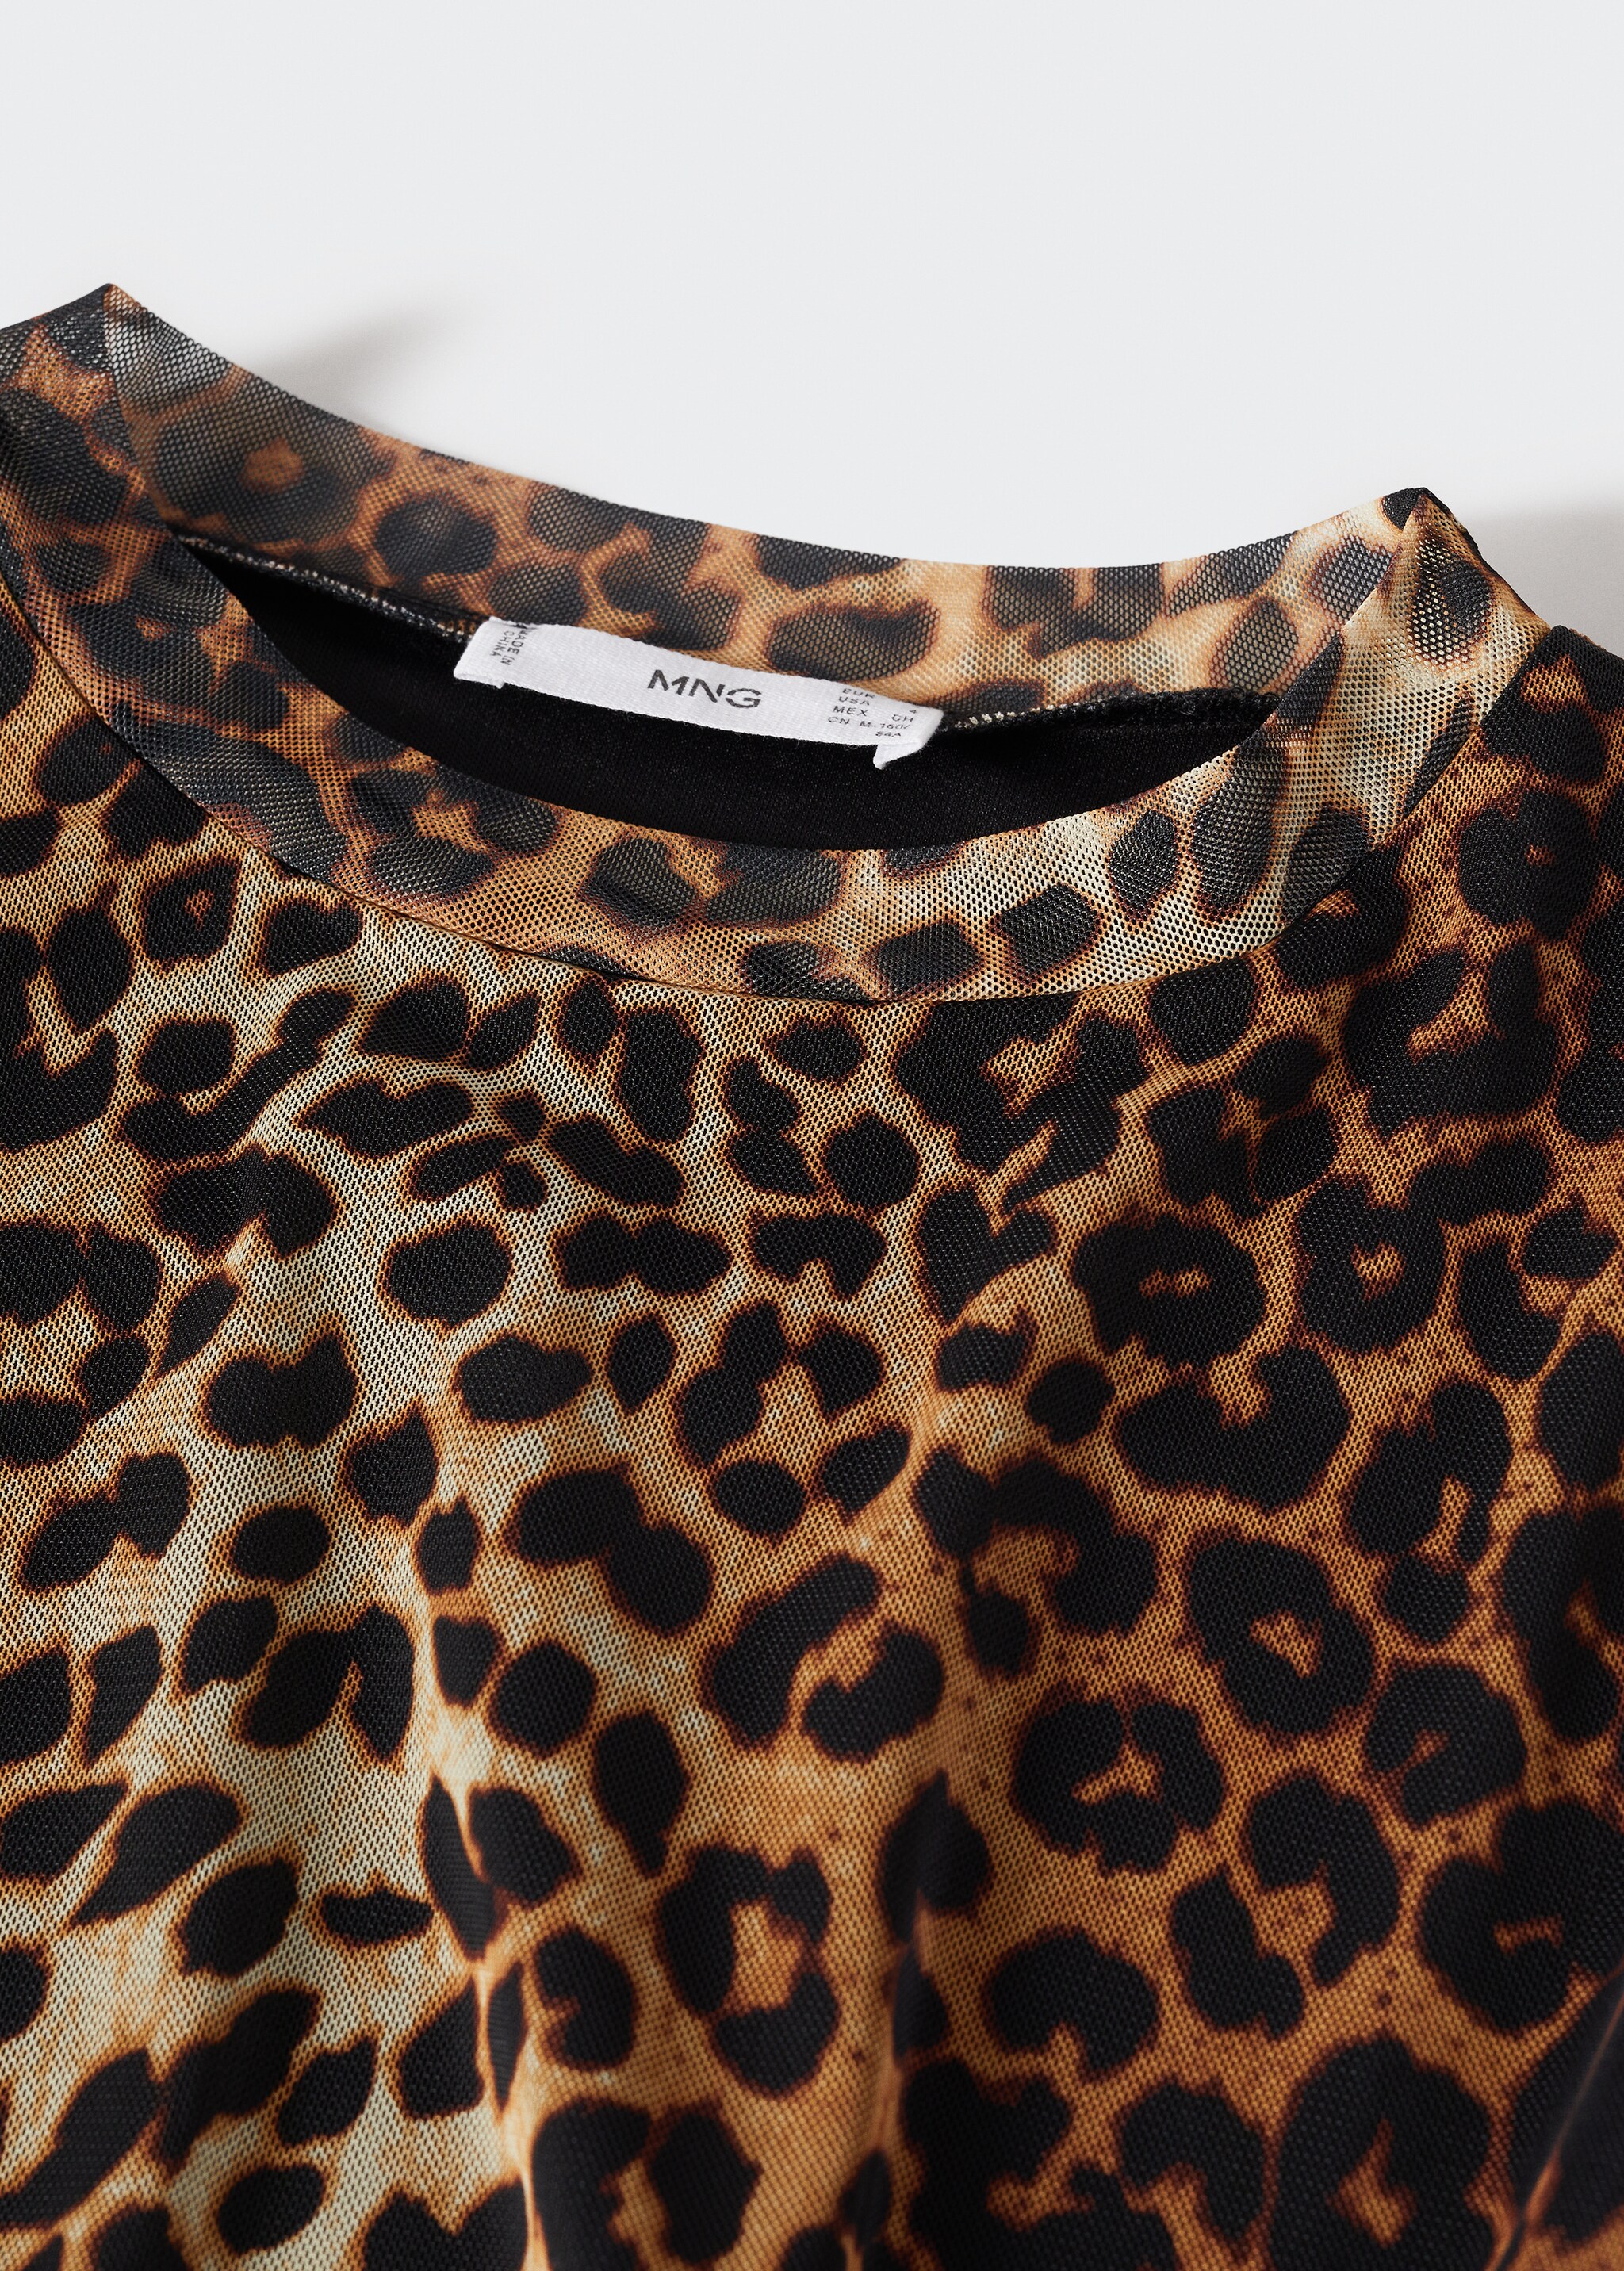 Animal print dress - Details of the article 8